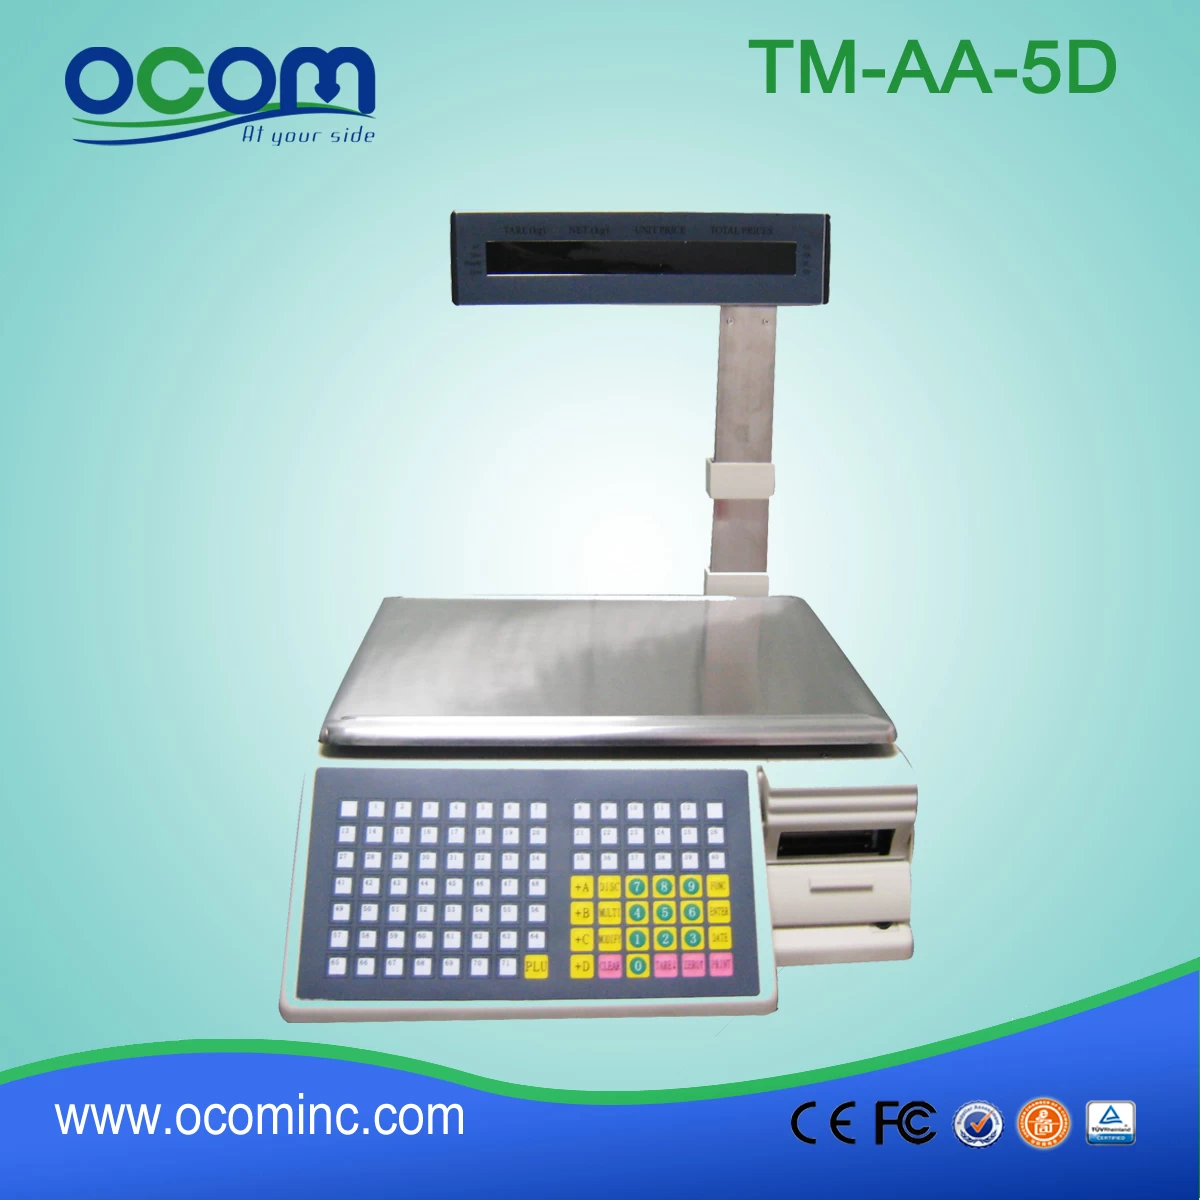 TM-AA-5D 30kg Electronic Digital Standing Weighing Scale for Fruits